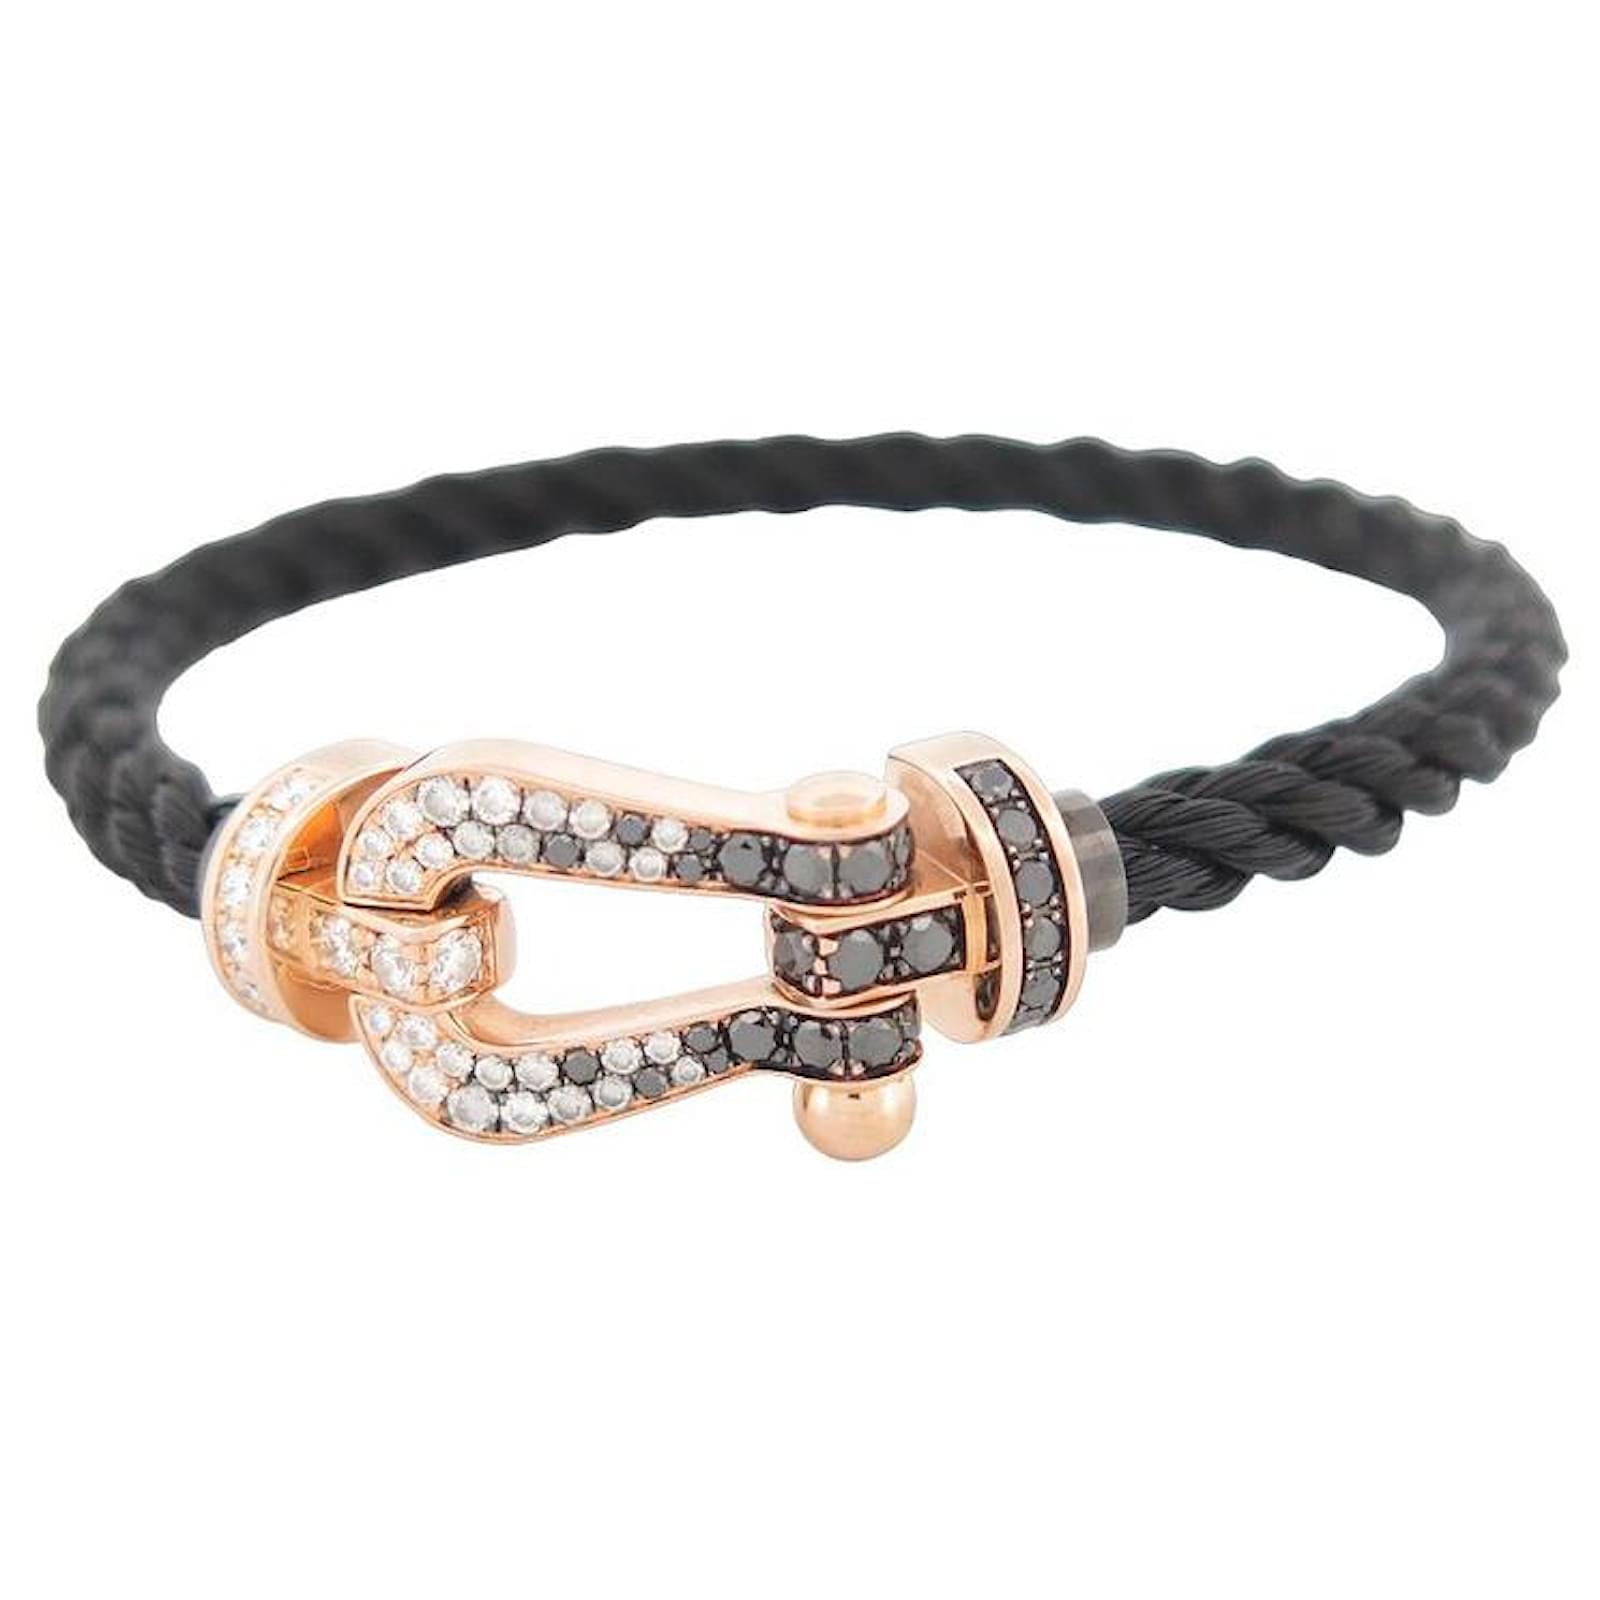 FRED Force 10 Series 18k Rose Gold Diamond Bracelet.Red cable. in